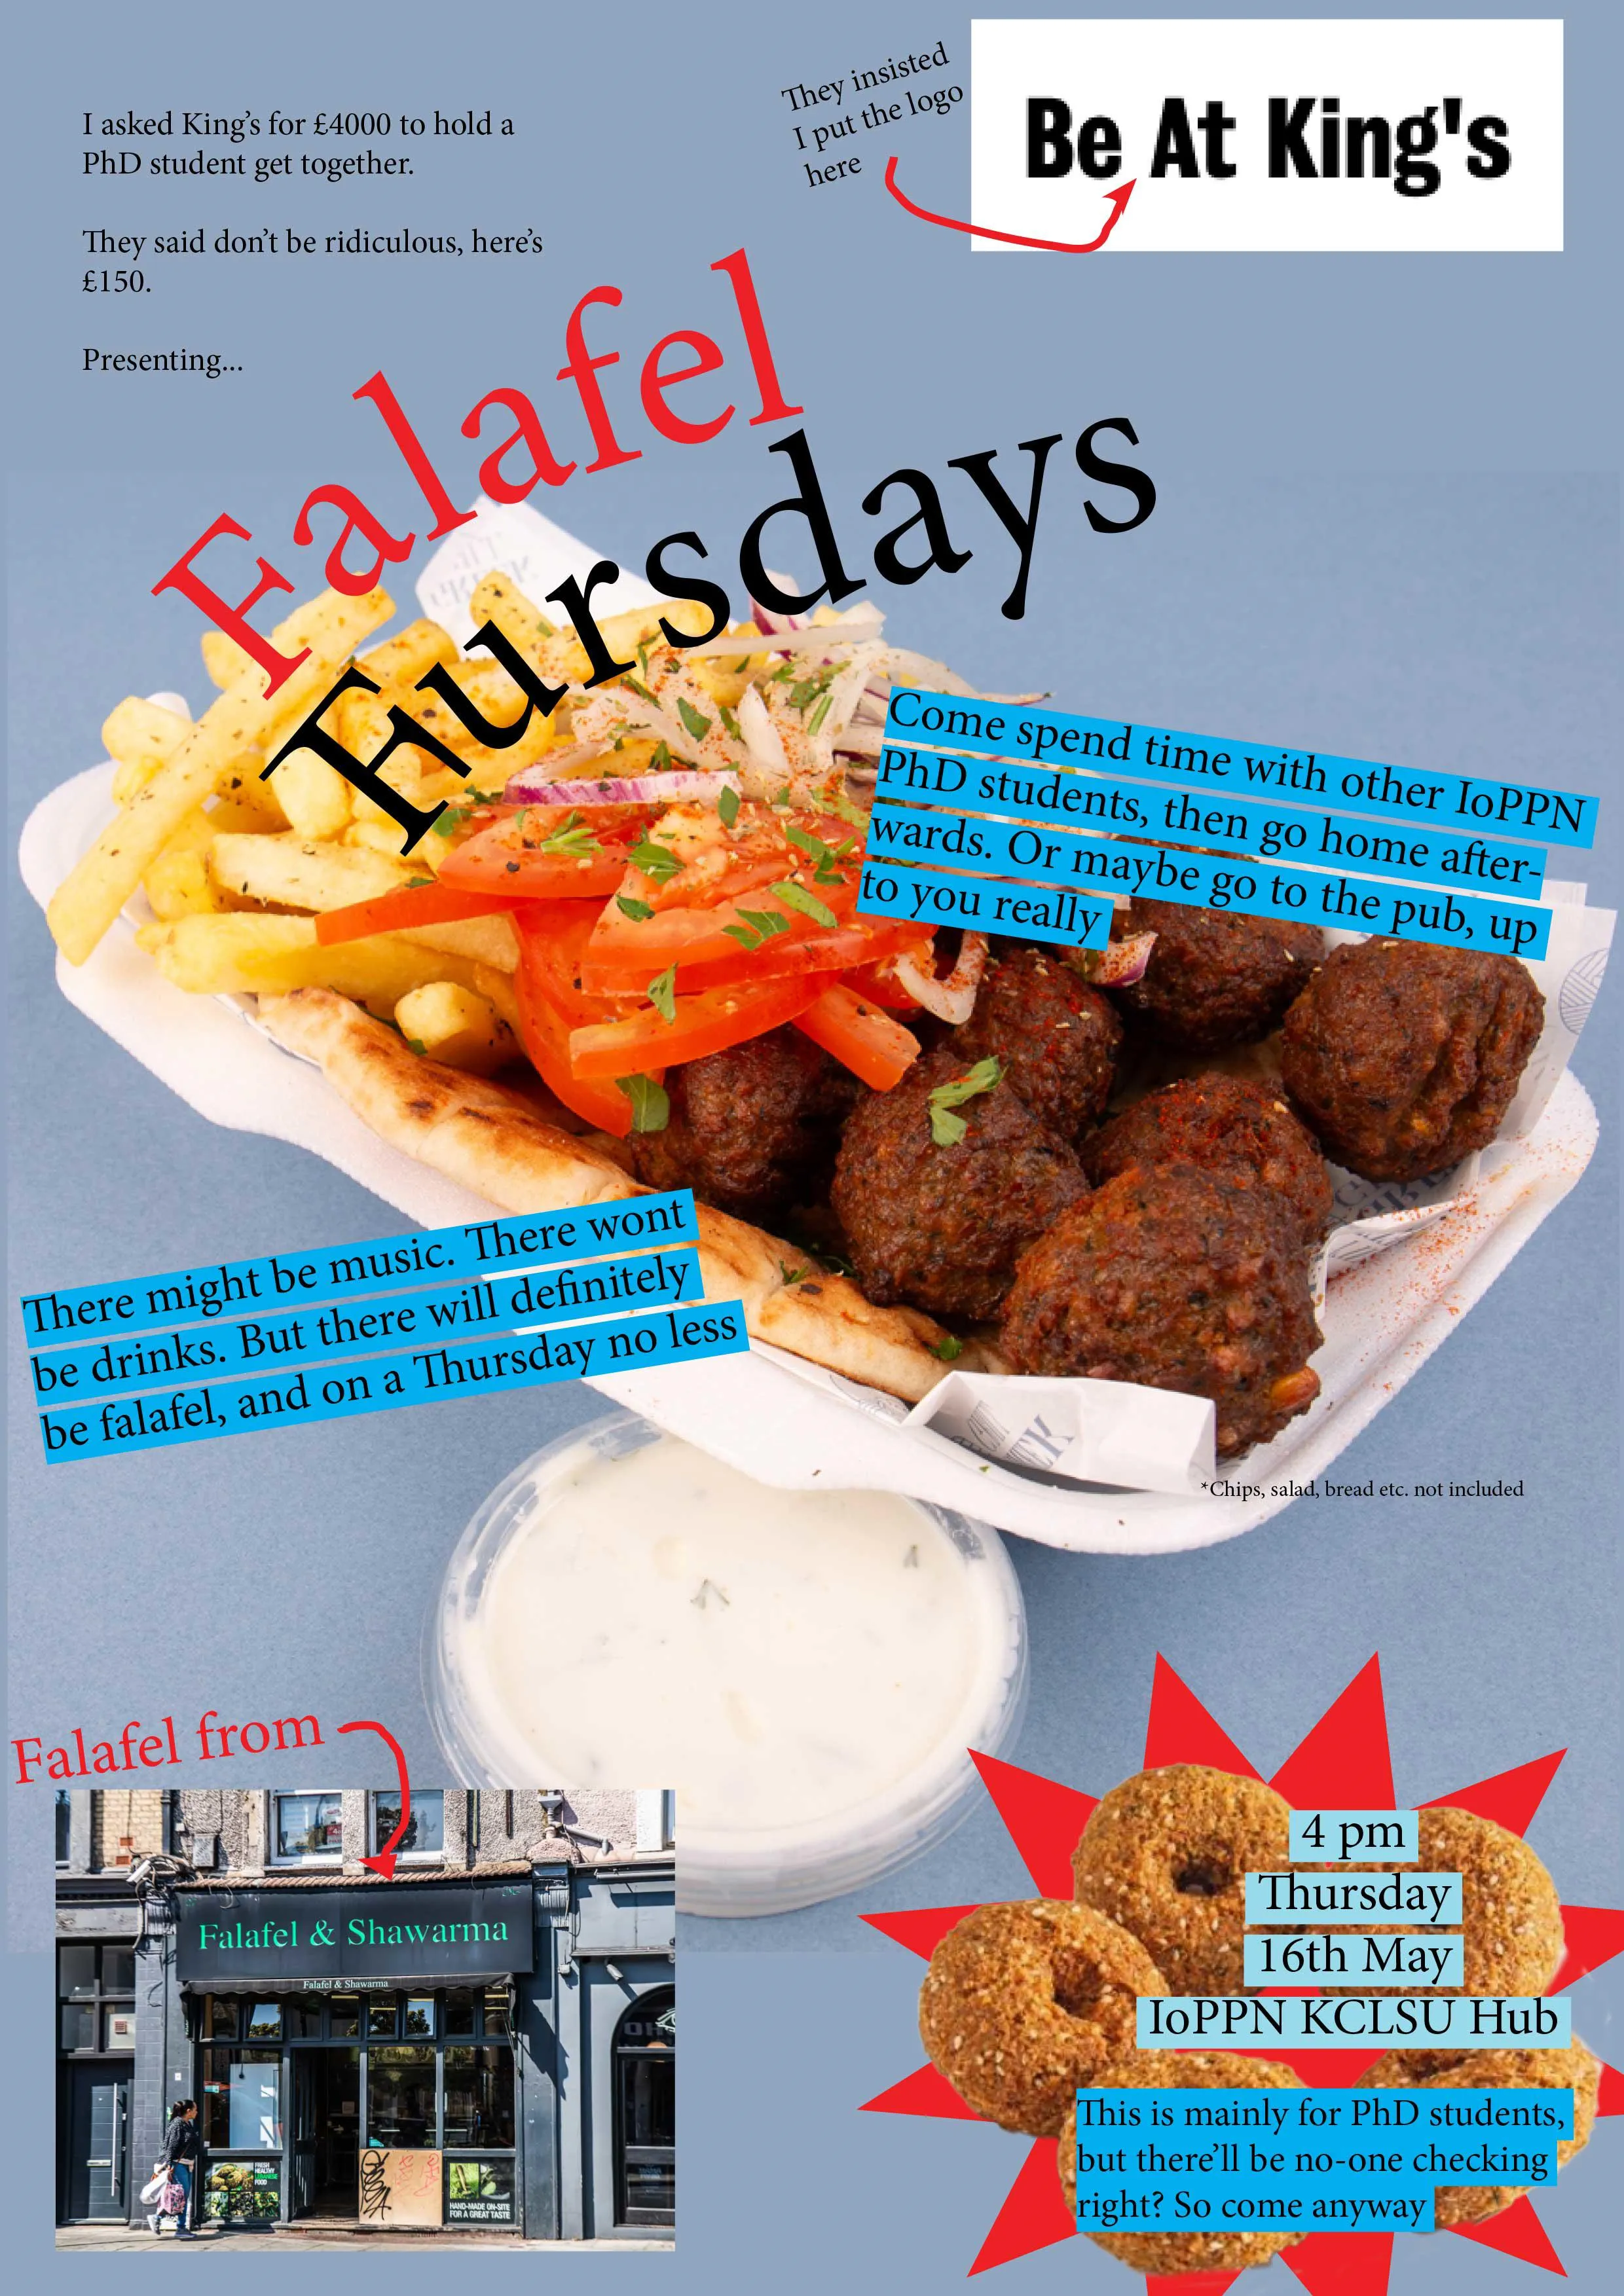 Poster with text and an image of falafel, text reads 'Come spend time with other IoPPN PhD students and then go home afterwards.Or maybe fgo to the pub up to you really.  